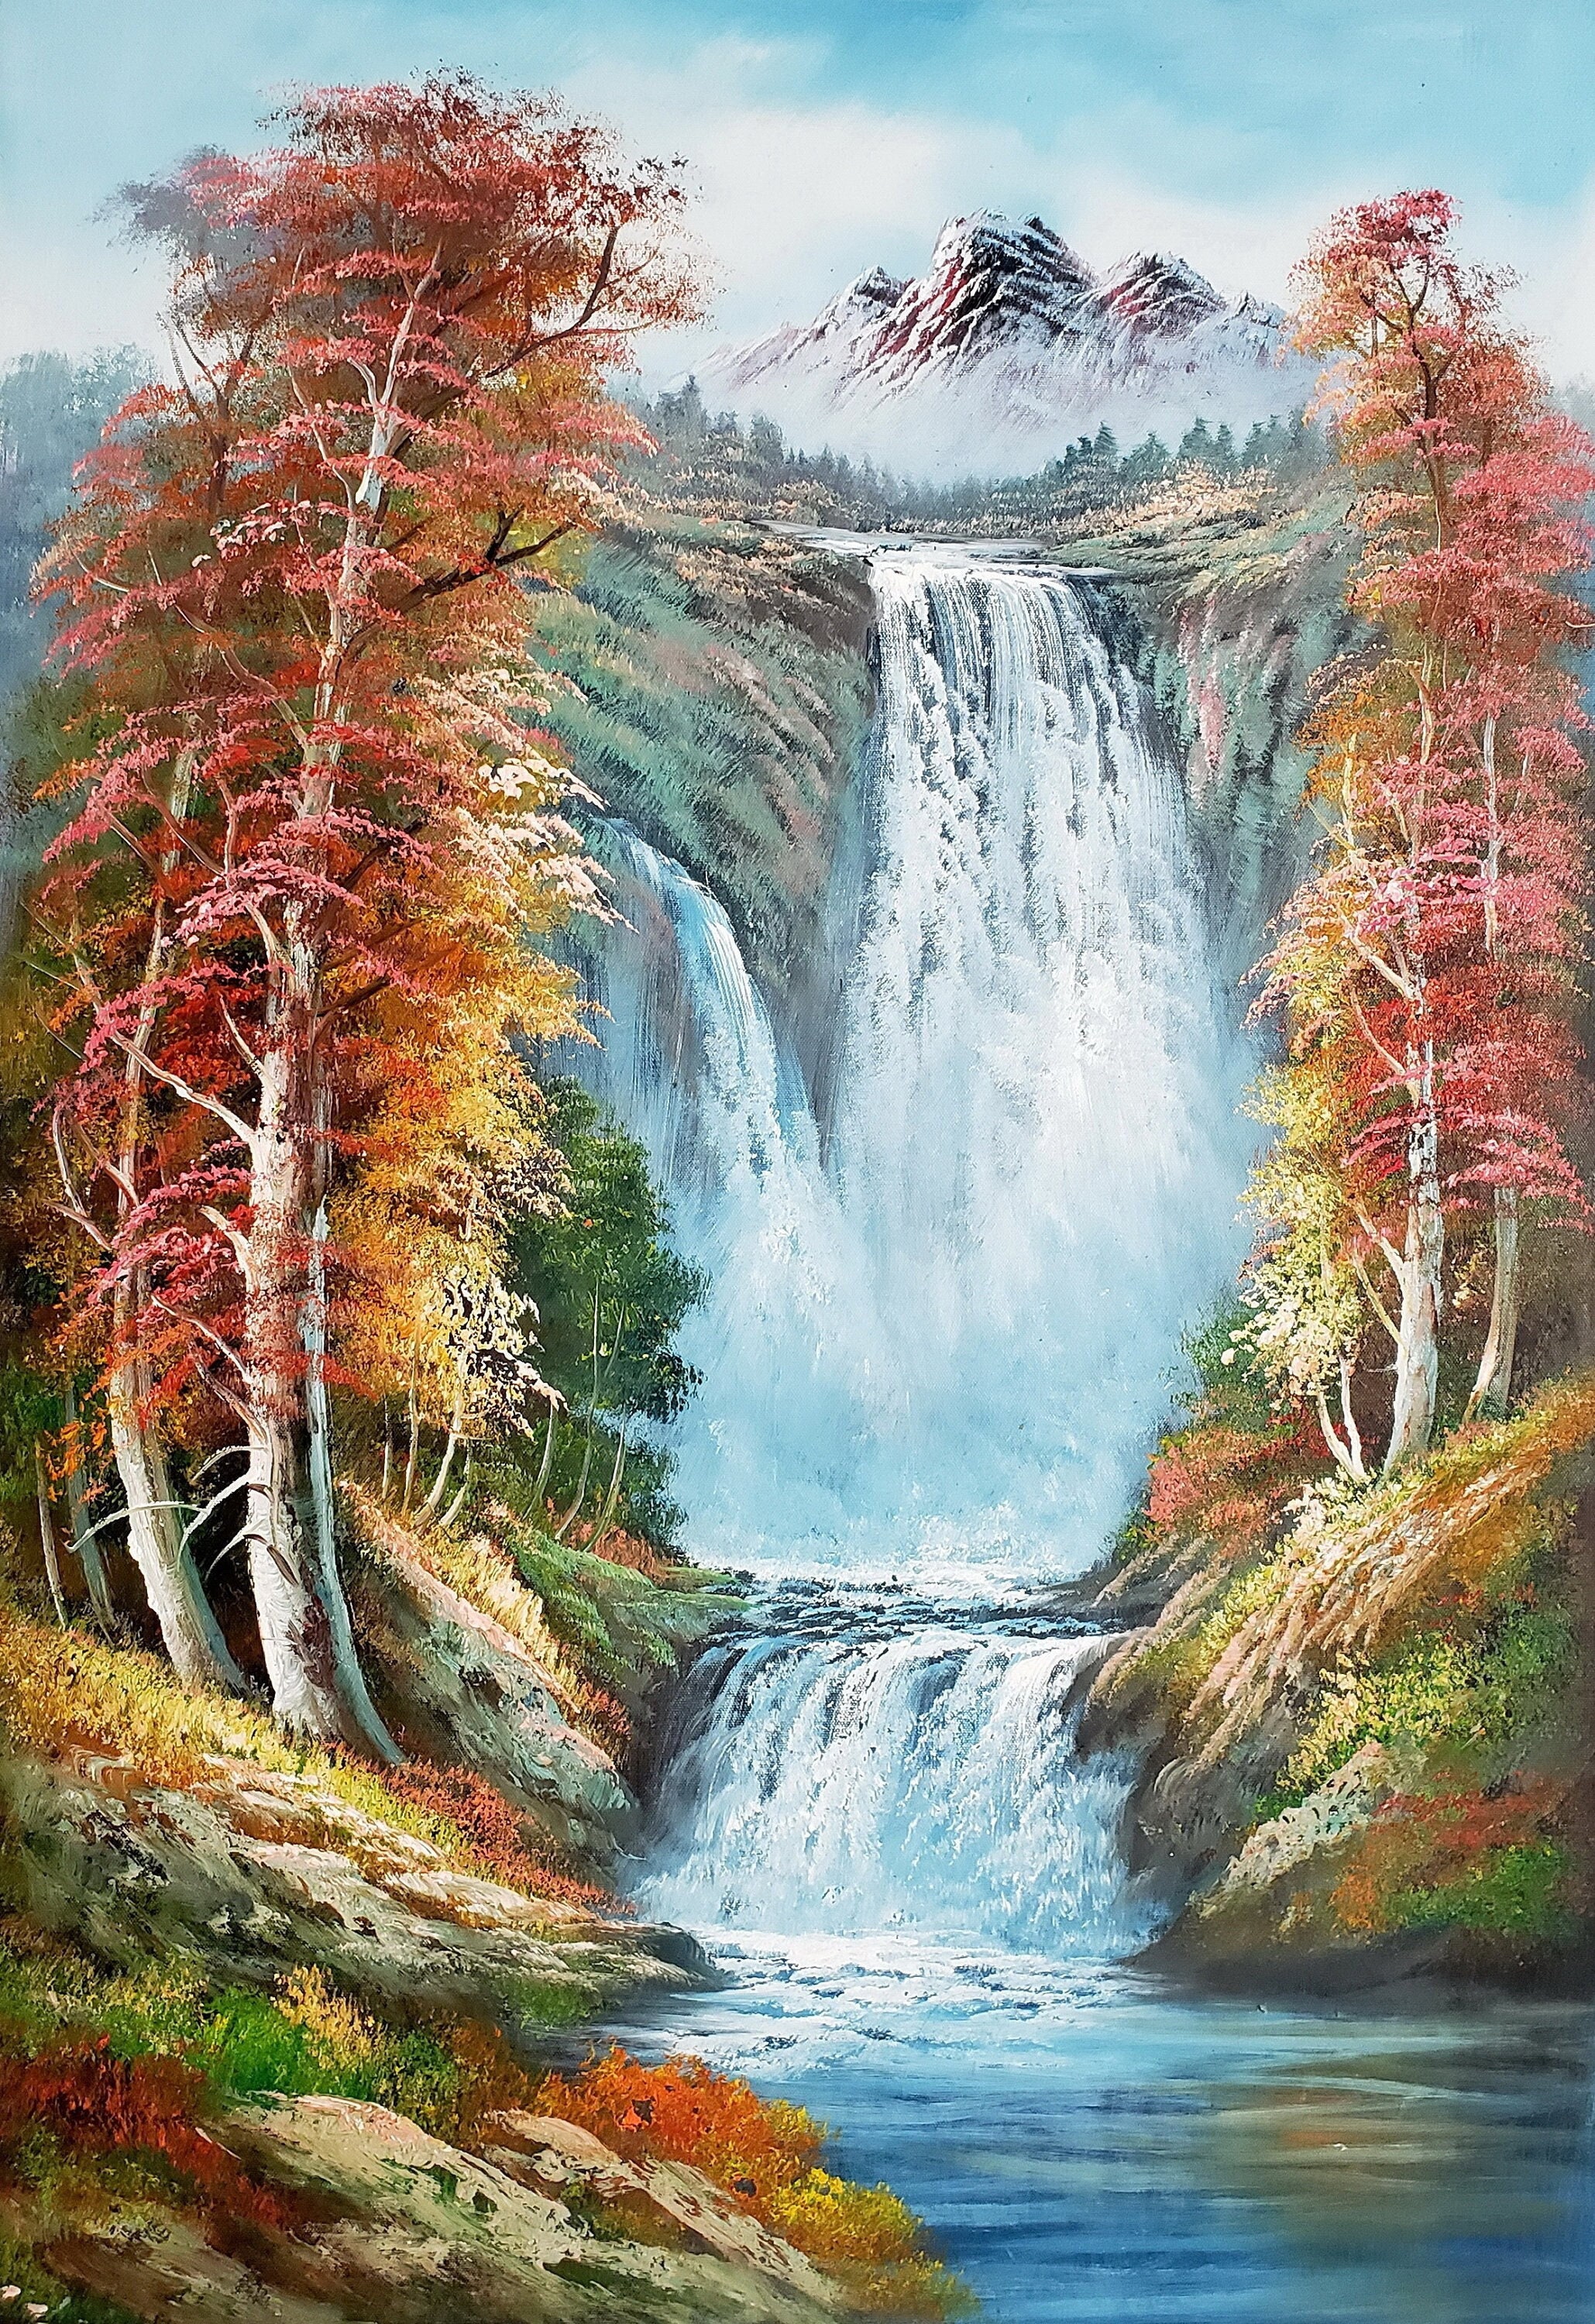 Oil Painting on a 3x4ft Canvas with Steps — Steemit